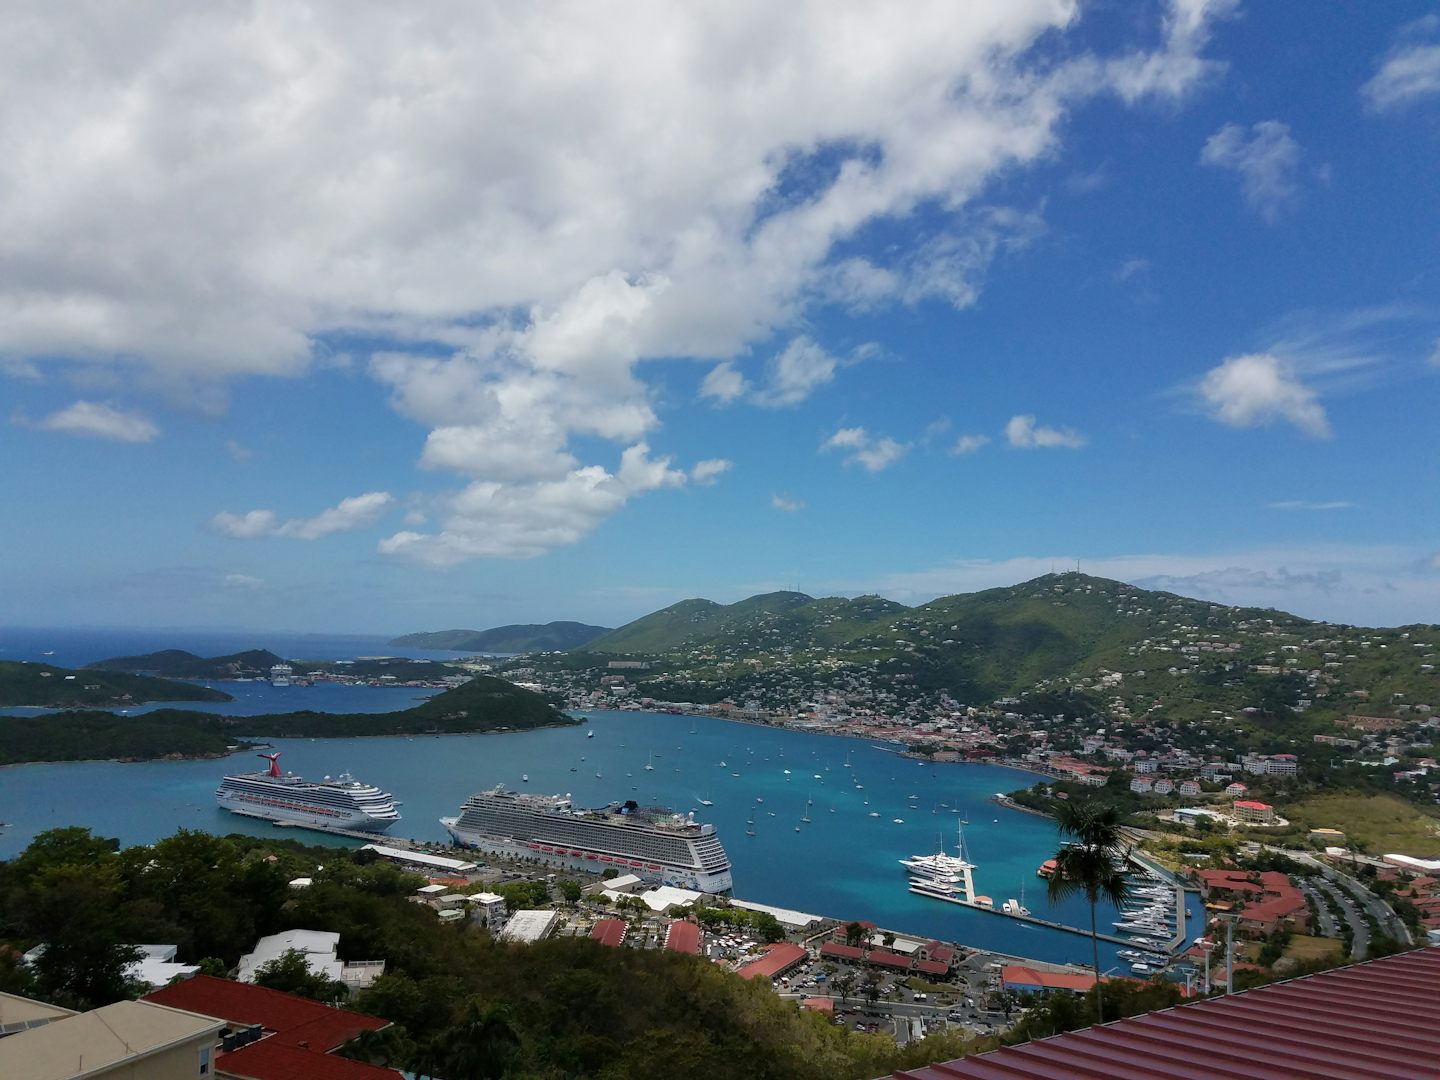 View from Paradise Point in St. Thomas.